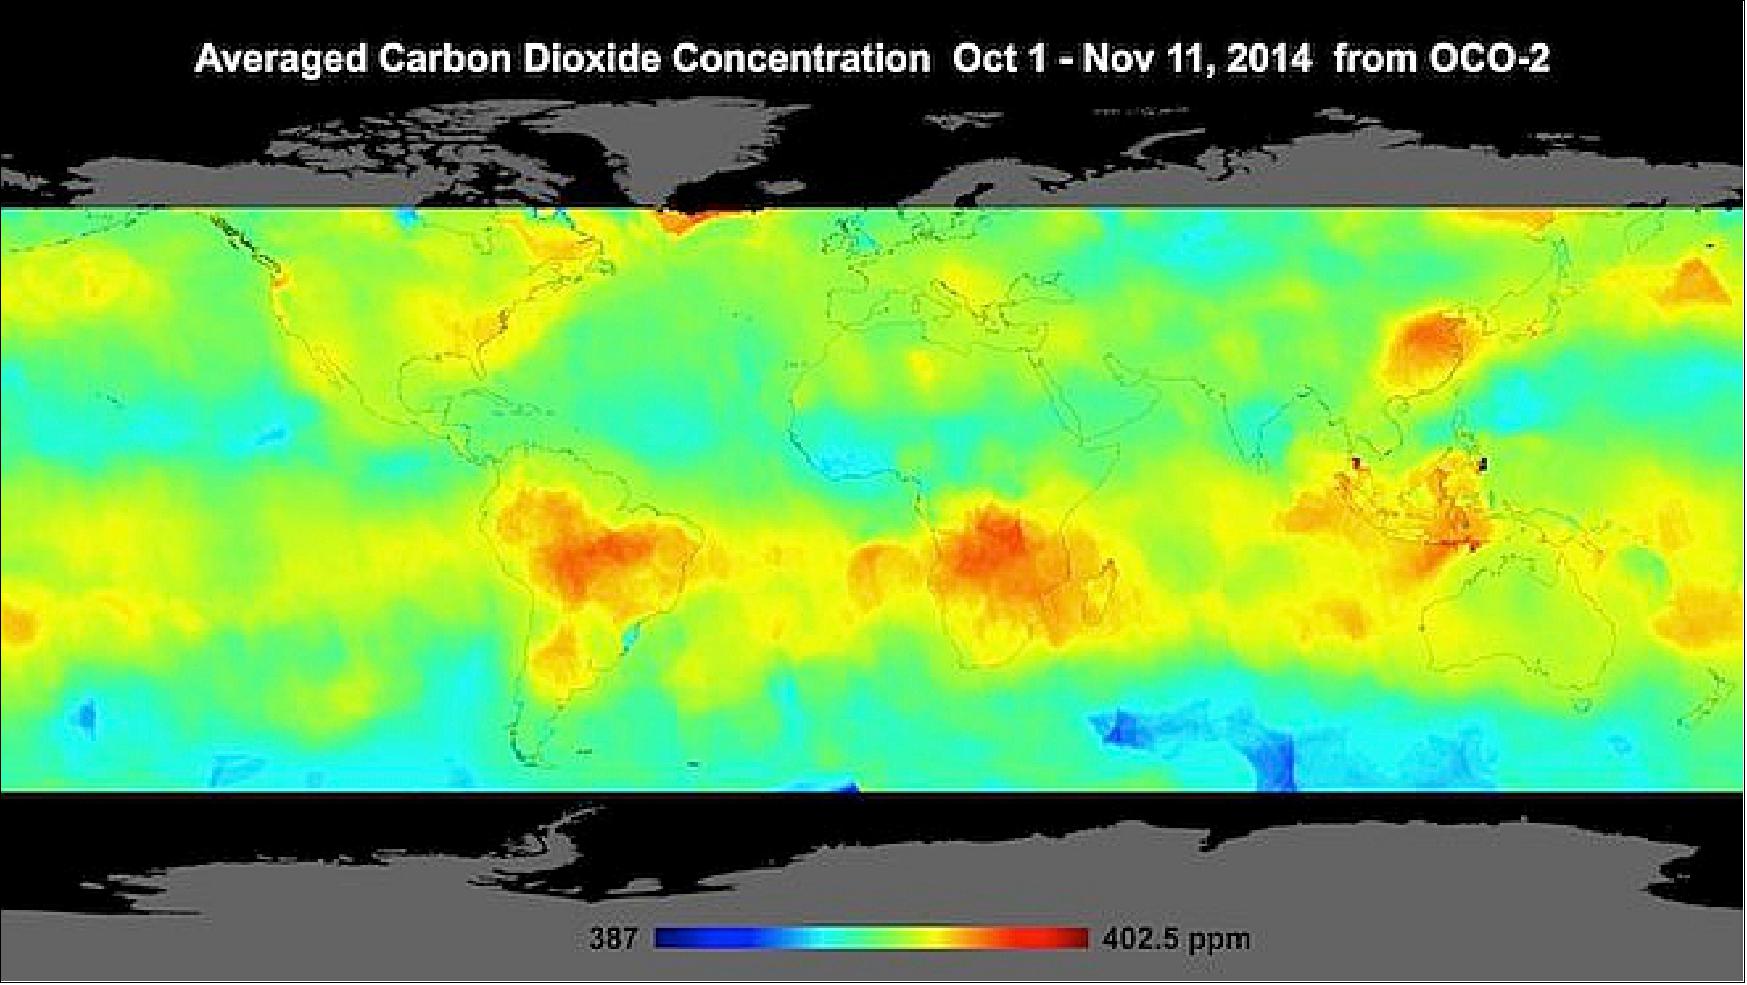 Figure 2: This map, pieced together with data from NASA's OCO-2, shows average global atmospheric carbon dioxide concentrations from Oct. 1 through Nov. 11,2014 (image credit: NASA/JPL)